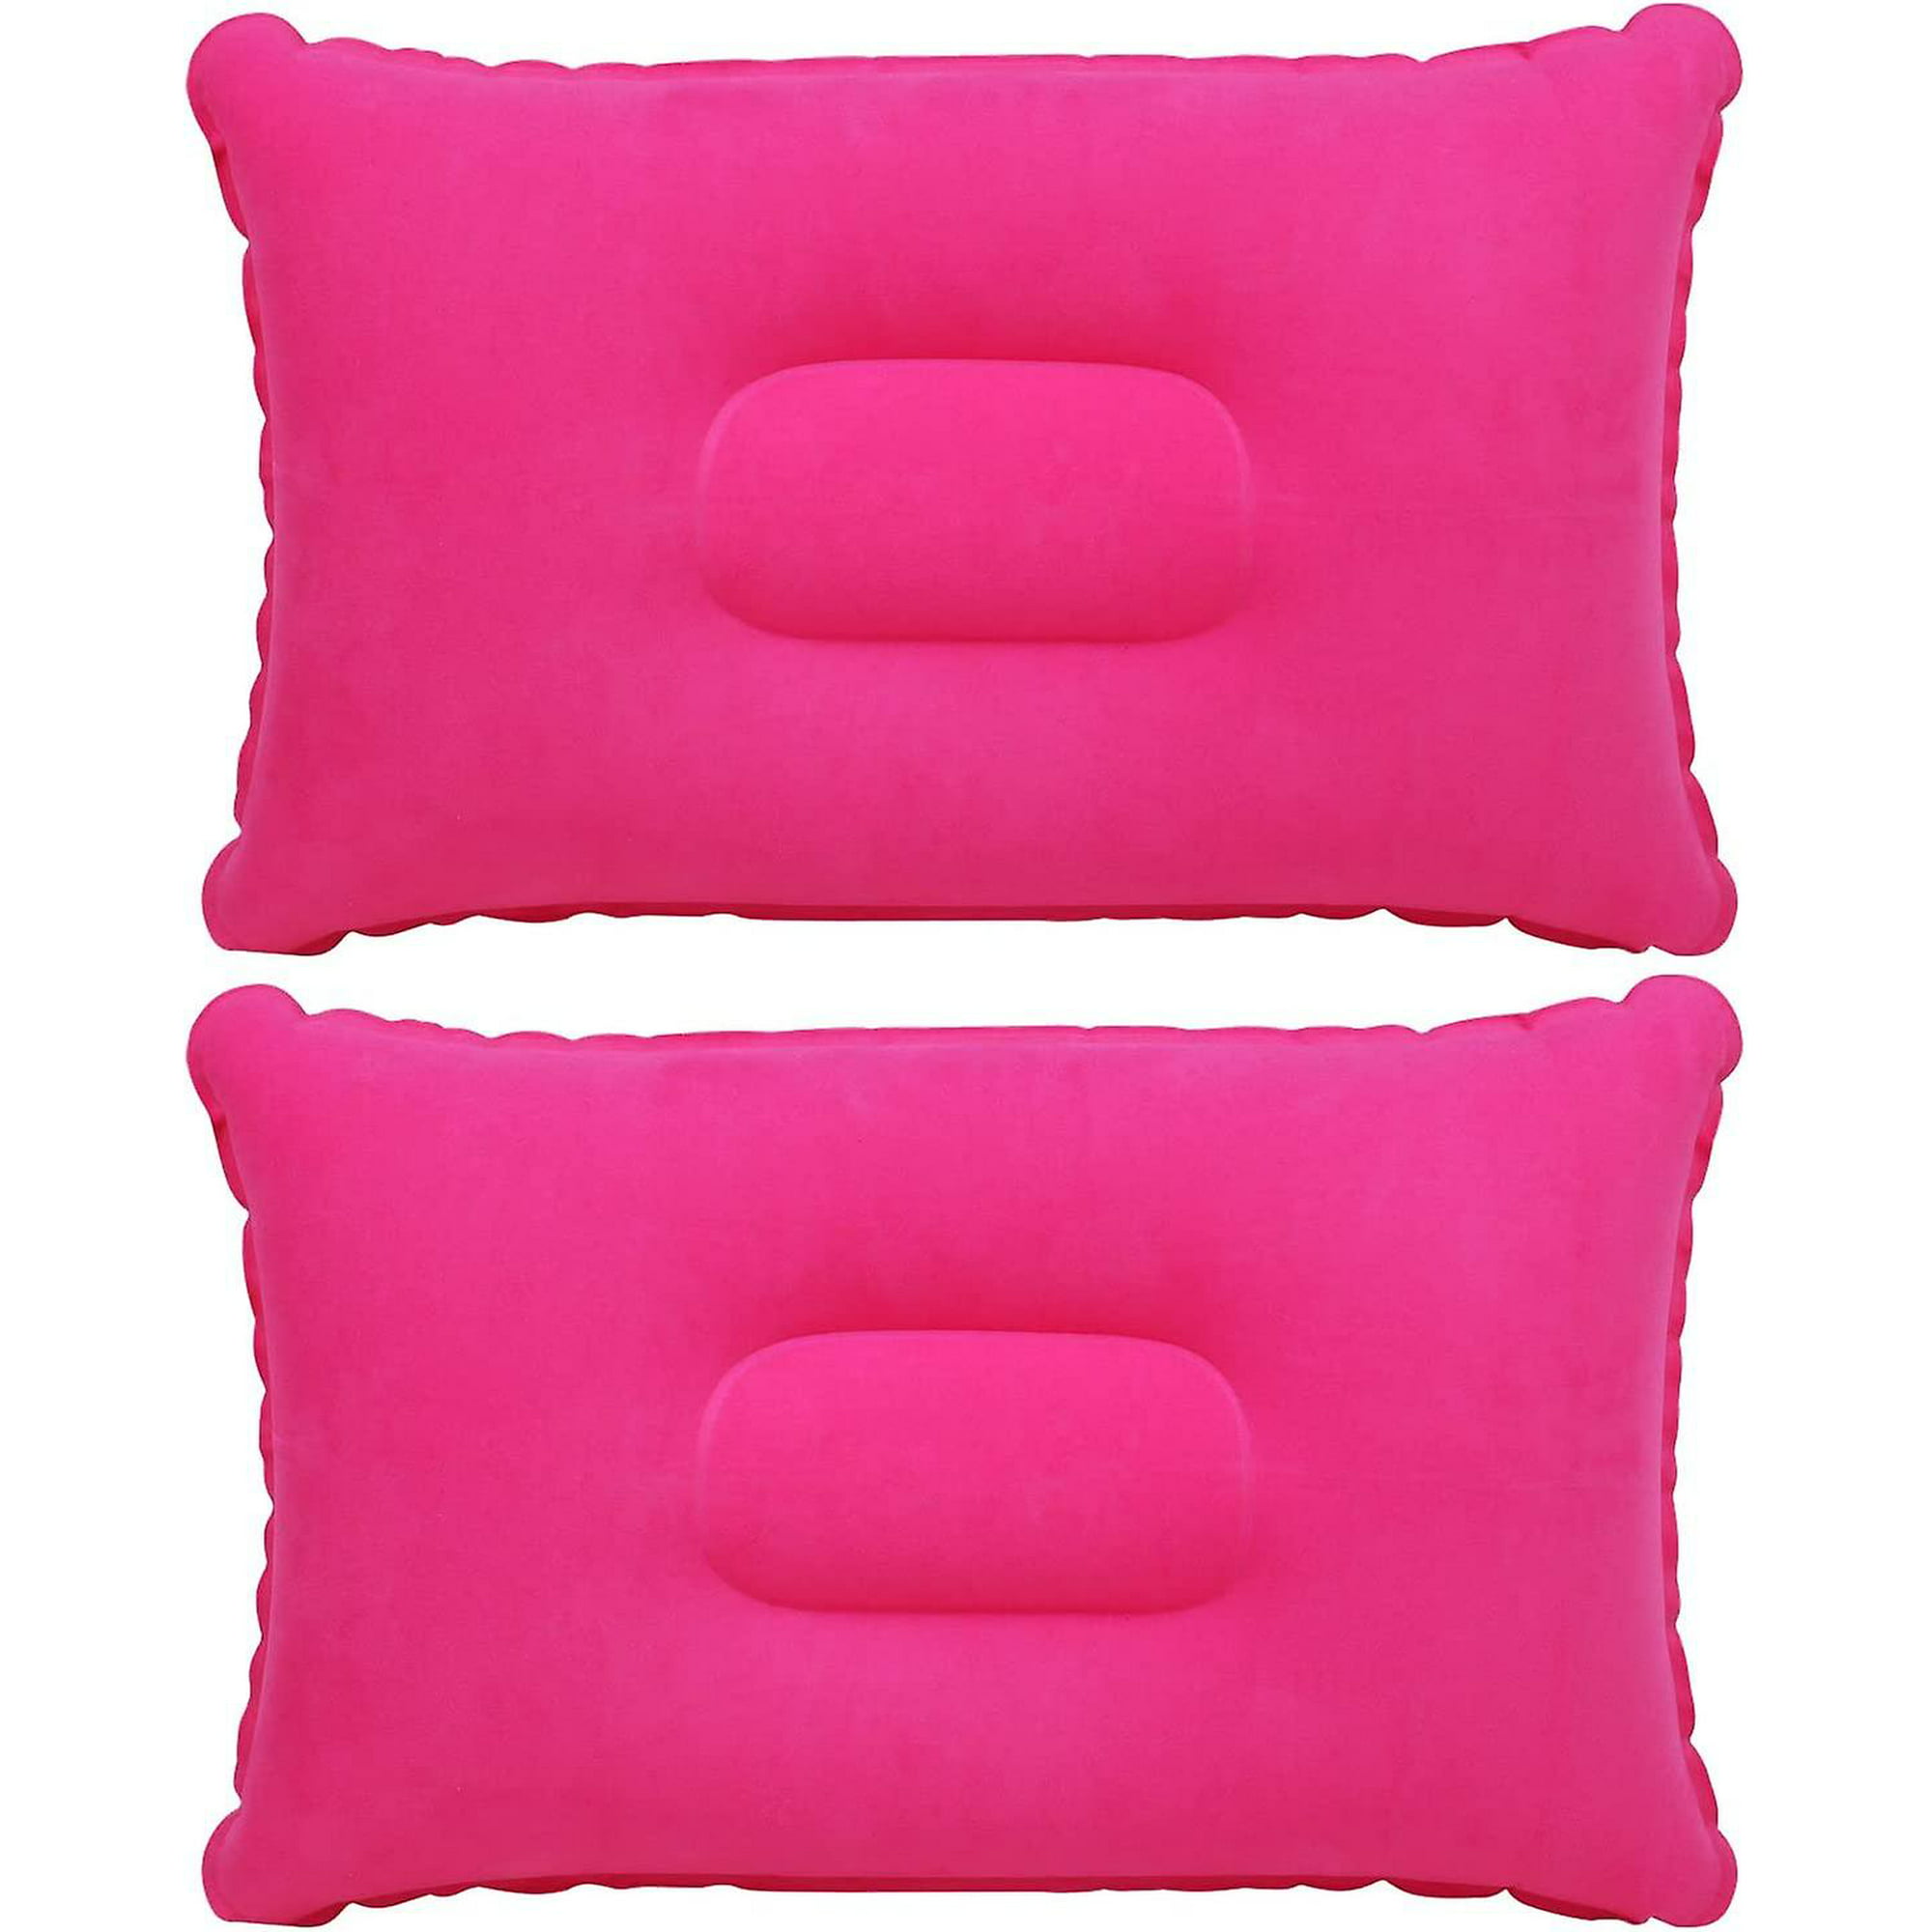 Montagne: almohadas, inflables, almohada, inflable, almohadas inflables,  almohada inflable, almohadas de pvc, almohadas inflables pvc,, accesorios  de camping, almohadas para camping, almohadas inflables con pvc, venta de  almohadas inflables, almohadas